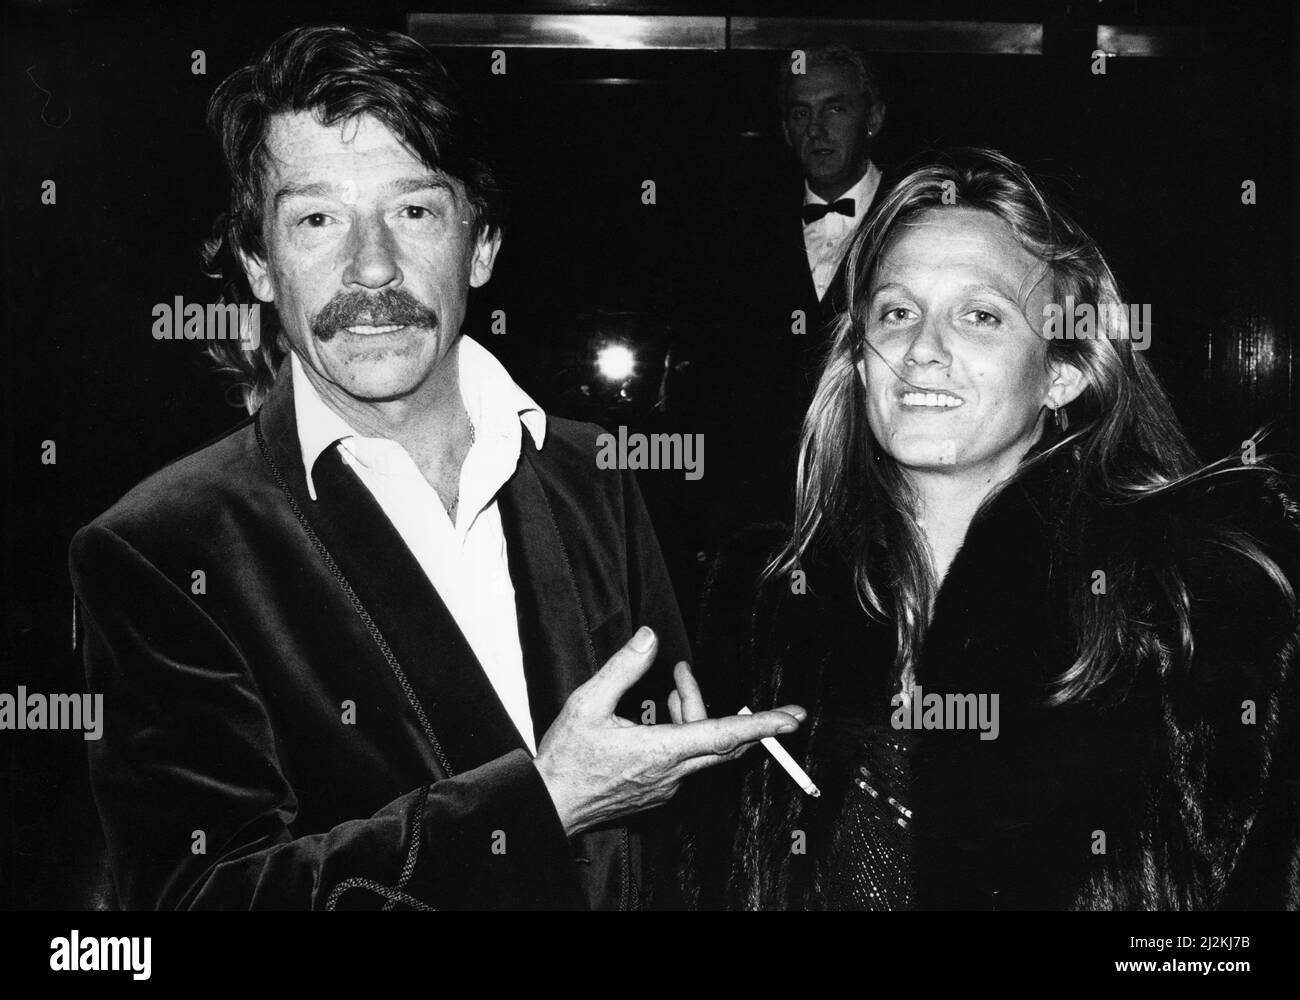 British actor John Hurt arrives at the Royal Albert Hall in London with his wife Donna to attend the musical 'The Hunting of the Snark' based on Lewis Carroll's poem.It was written by composer Mike Batt with John Hurt providing the narration. 1st April 1987. Stock Photo